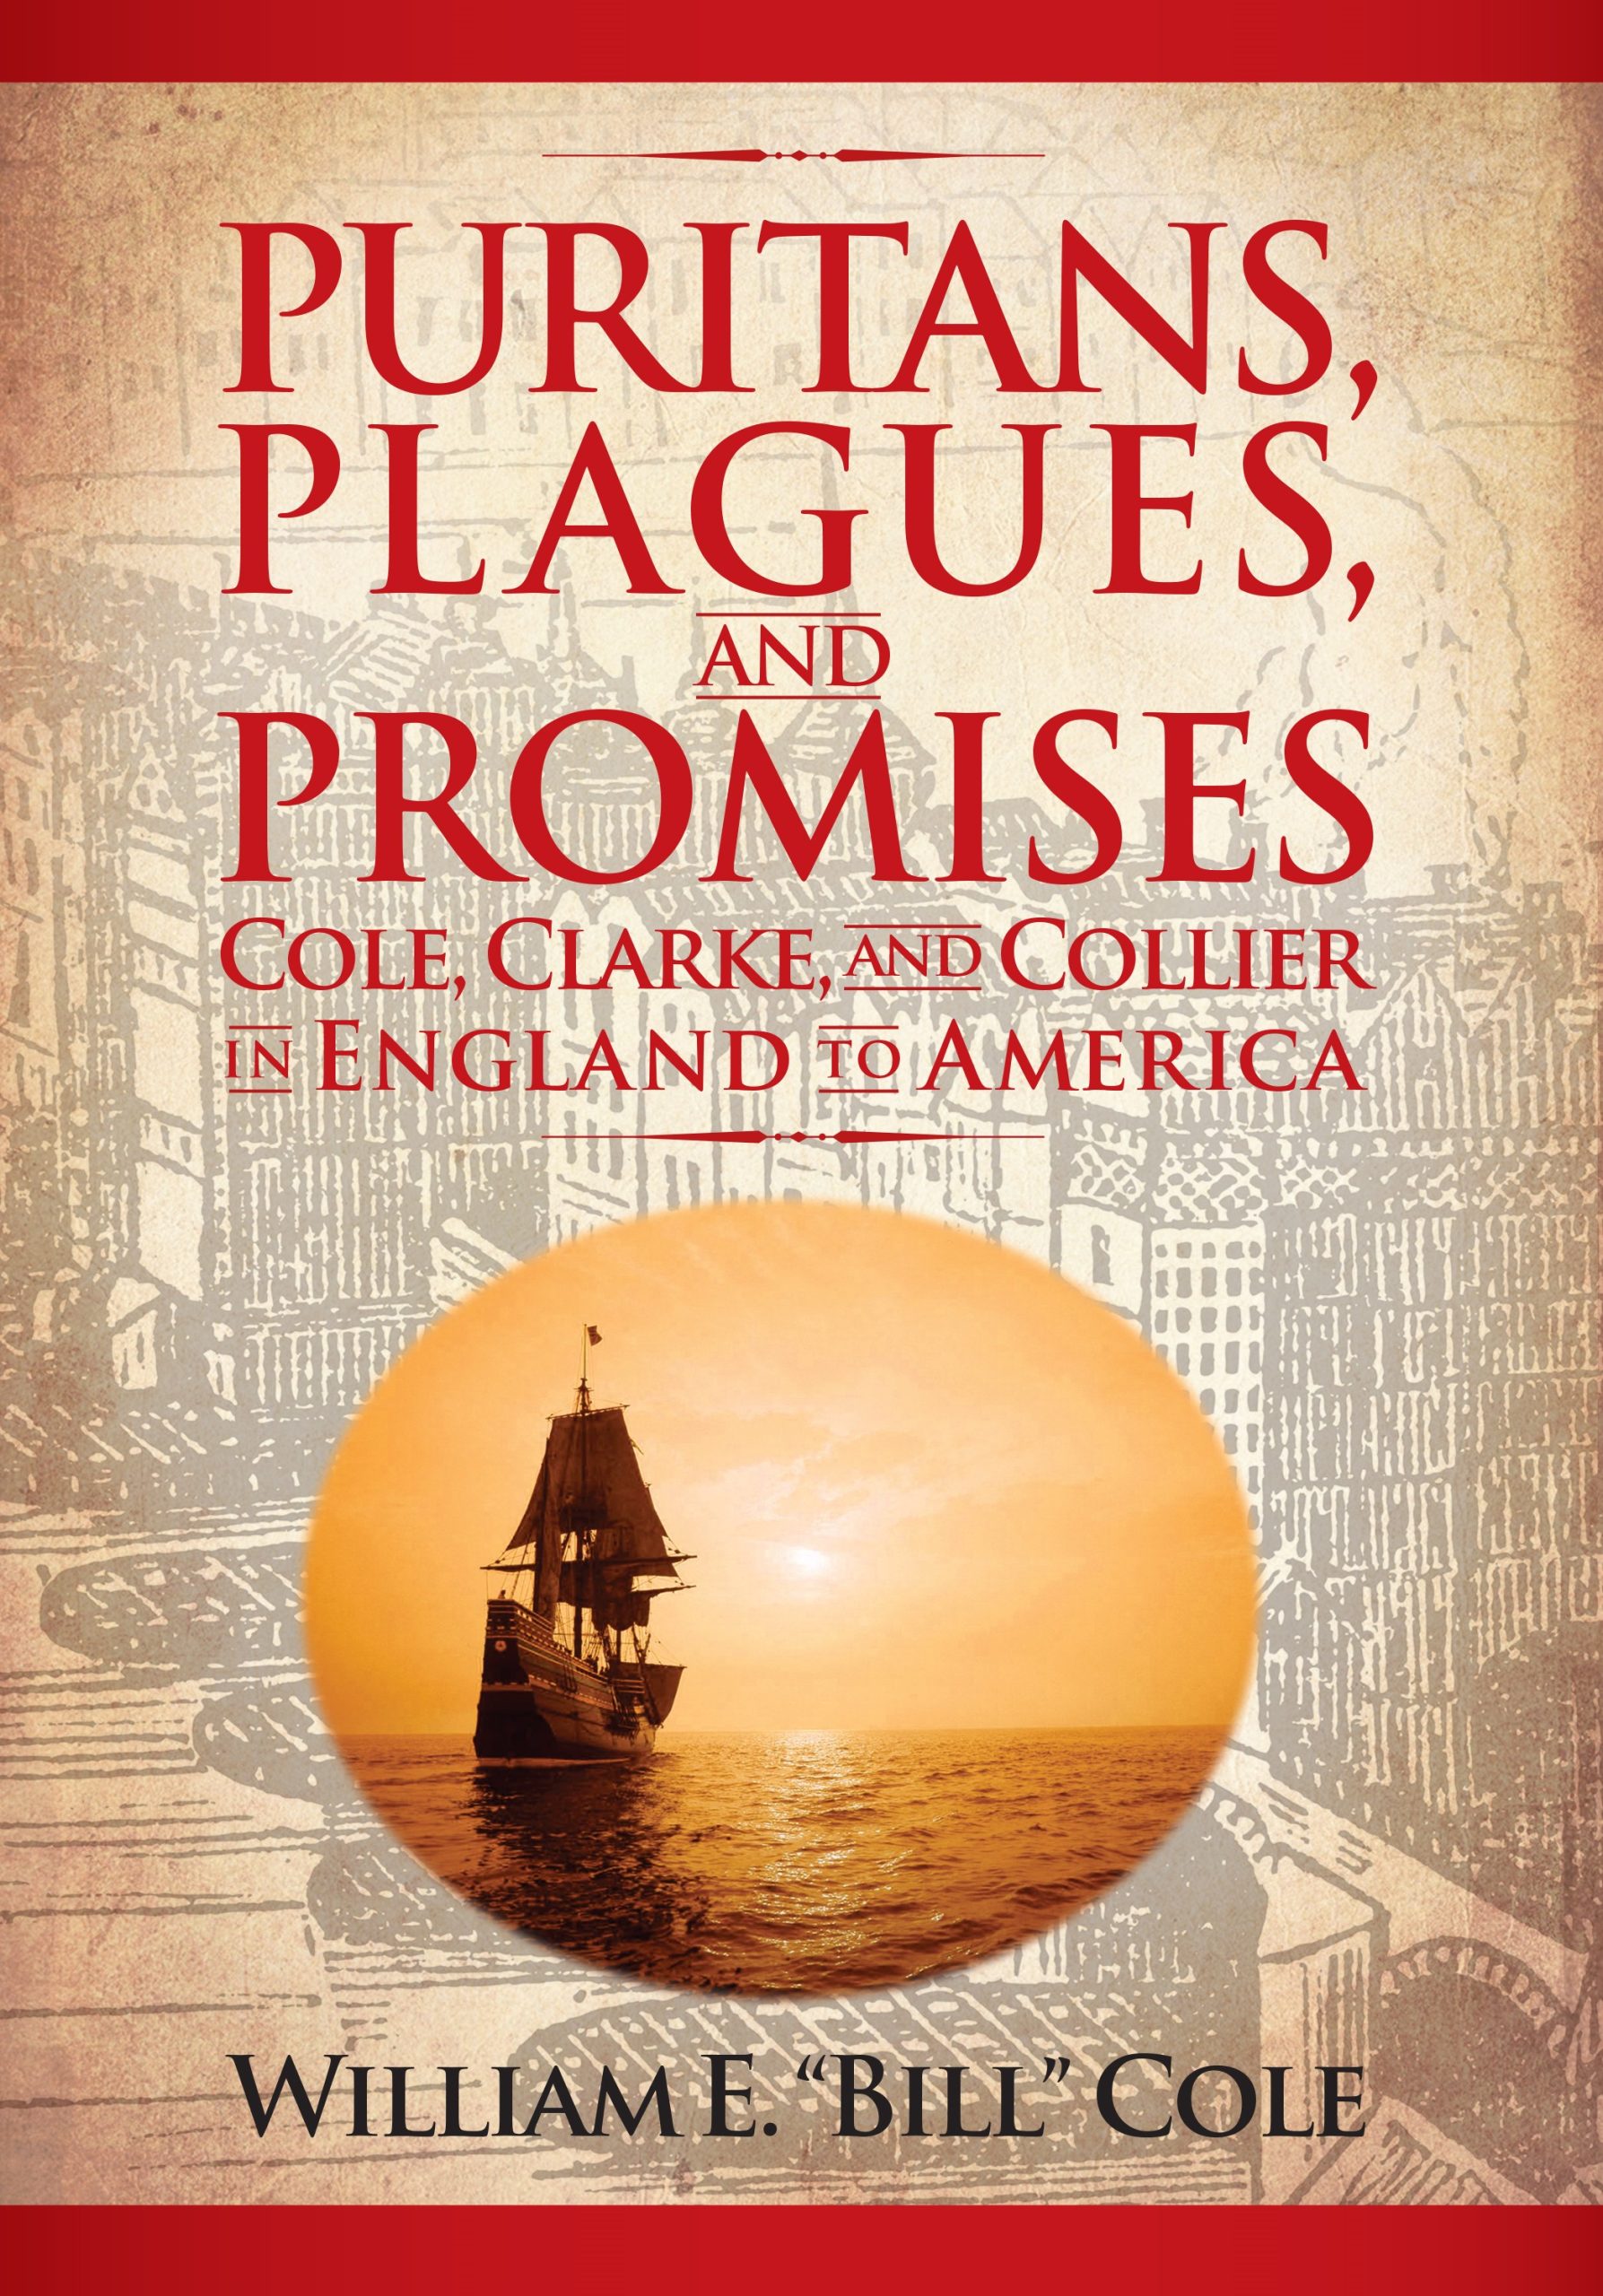 AVAILABLE SOON – Puritans, Plagues, and Promises – William E. “Bill” Cole’s NEW BOOK- reserve your copy today!